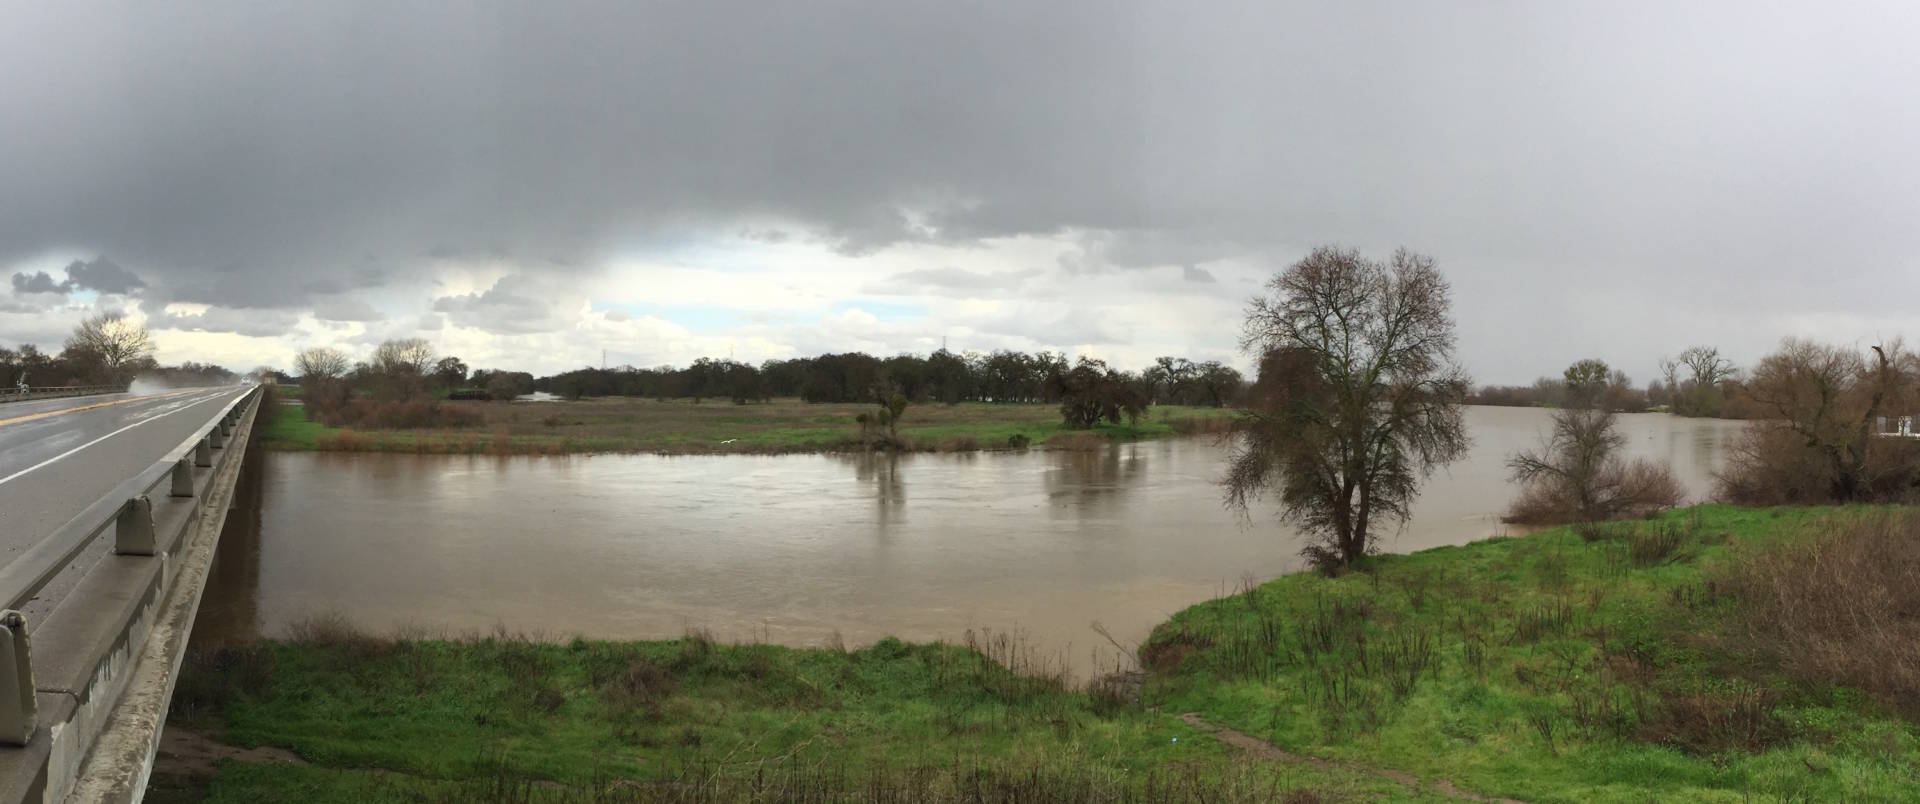 The San Joaquin River, which often runs dry before reaching its mouth, spreads out along Hwy 132 west of Modesto, after weekend storms. Craig Miller/KQED